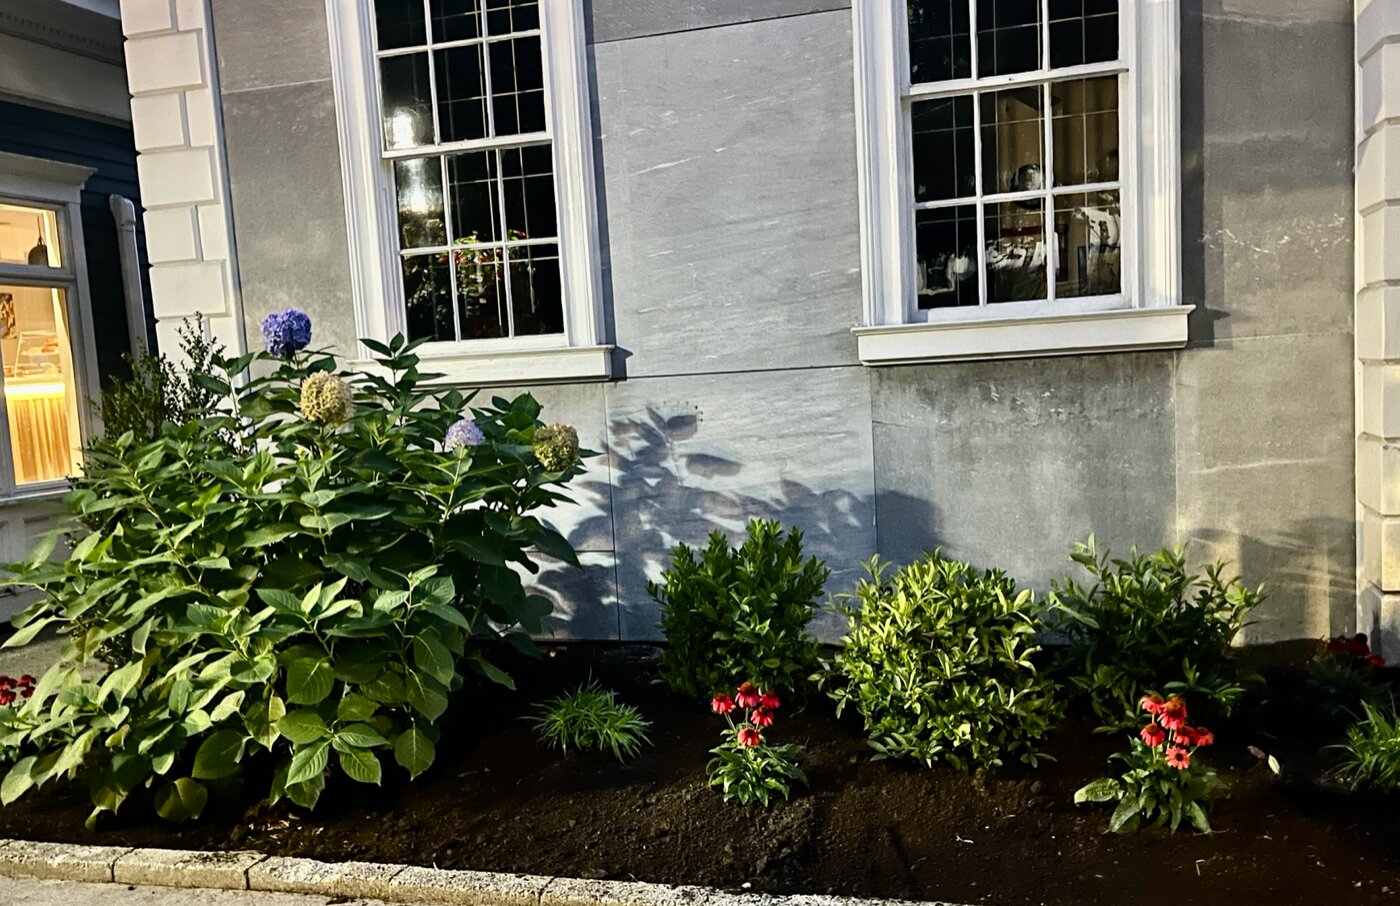 "What had previously had the aesthetics of the vegetation next to an I-95 off-ramp was now a stately, pristine garden that complimented the organization's work at the neighboring Rogers Free Library."